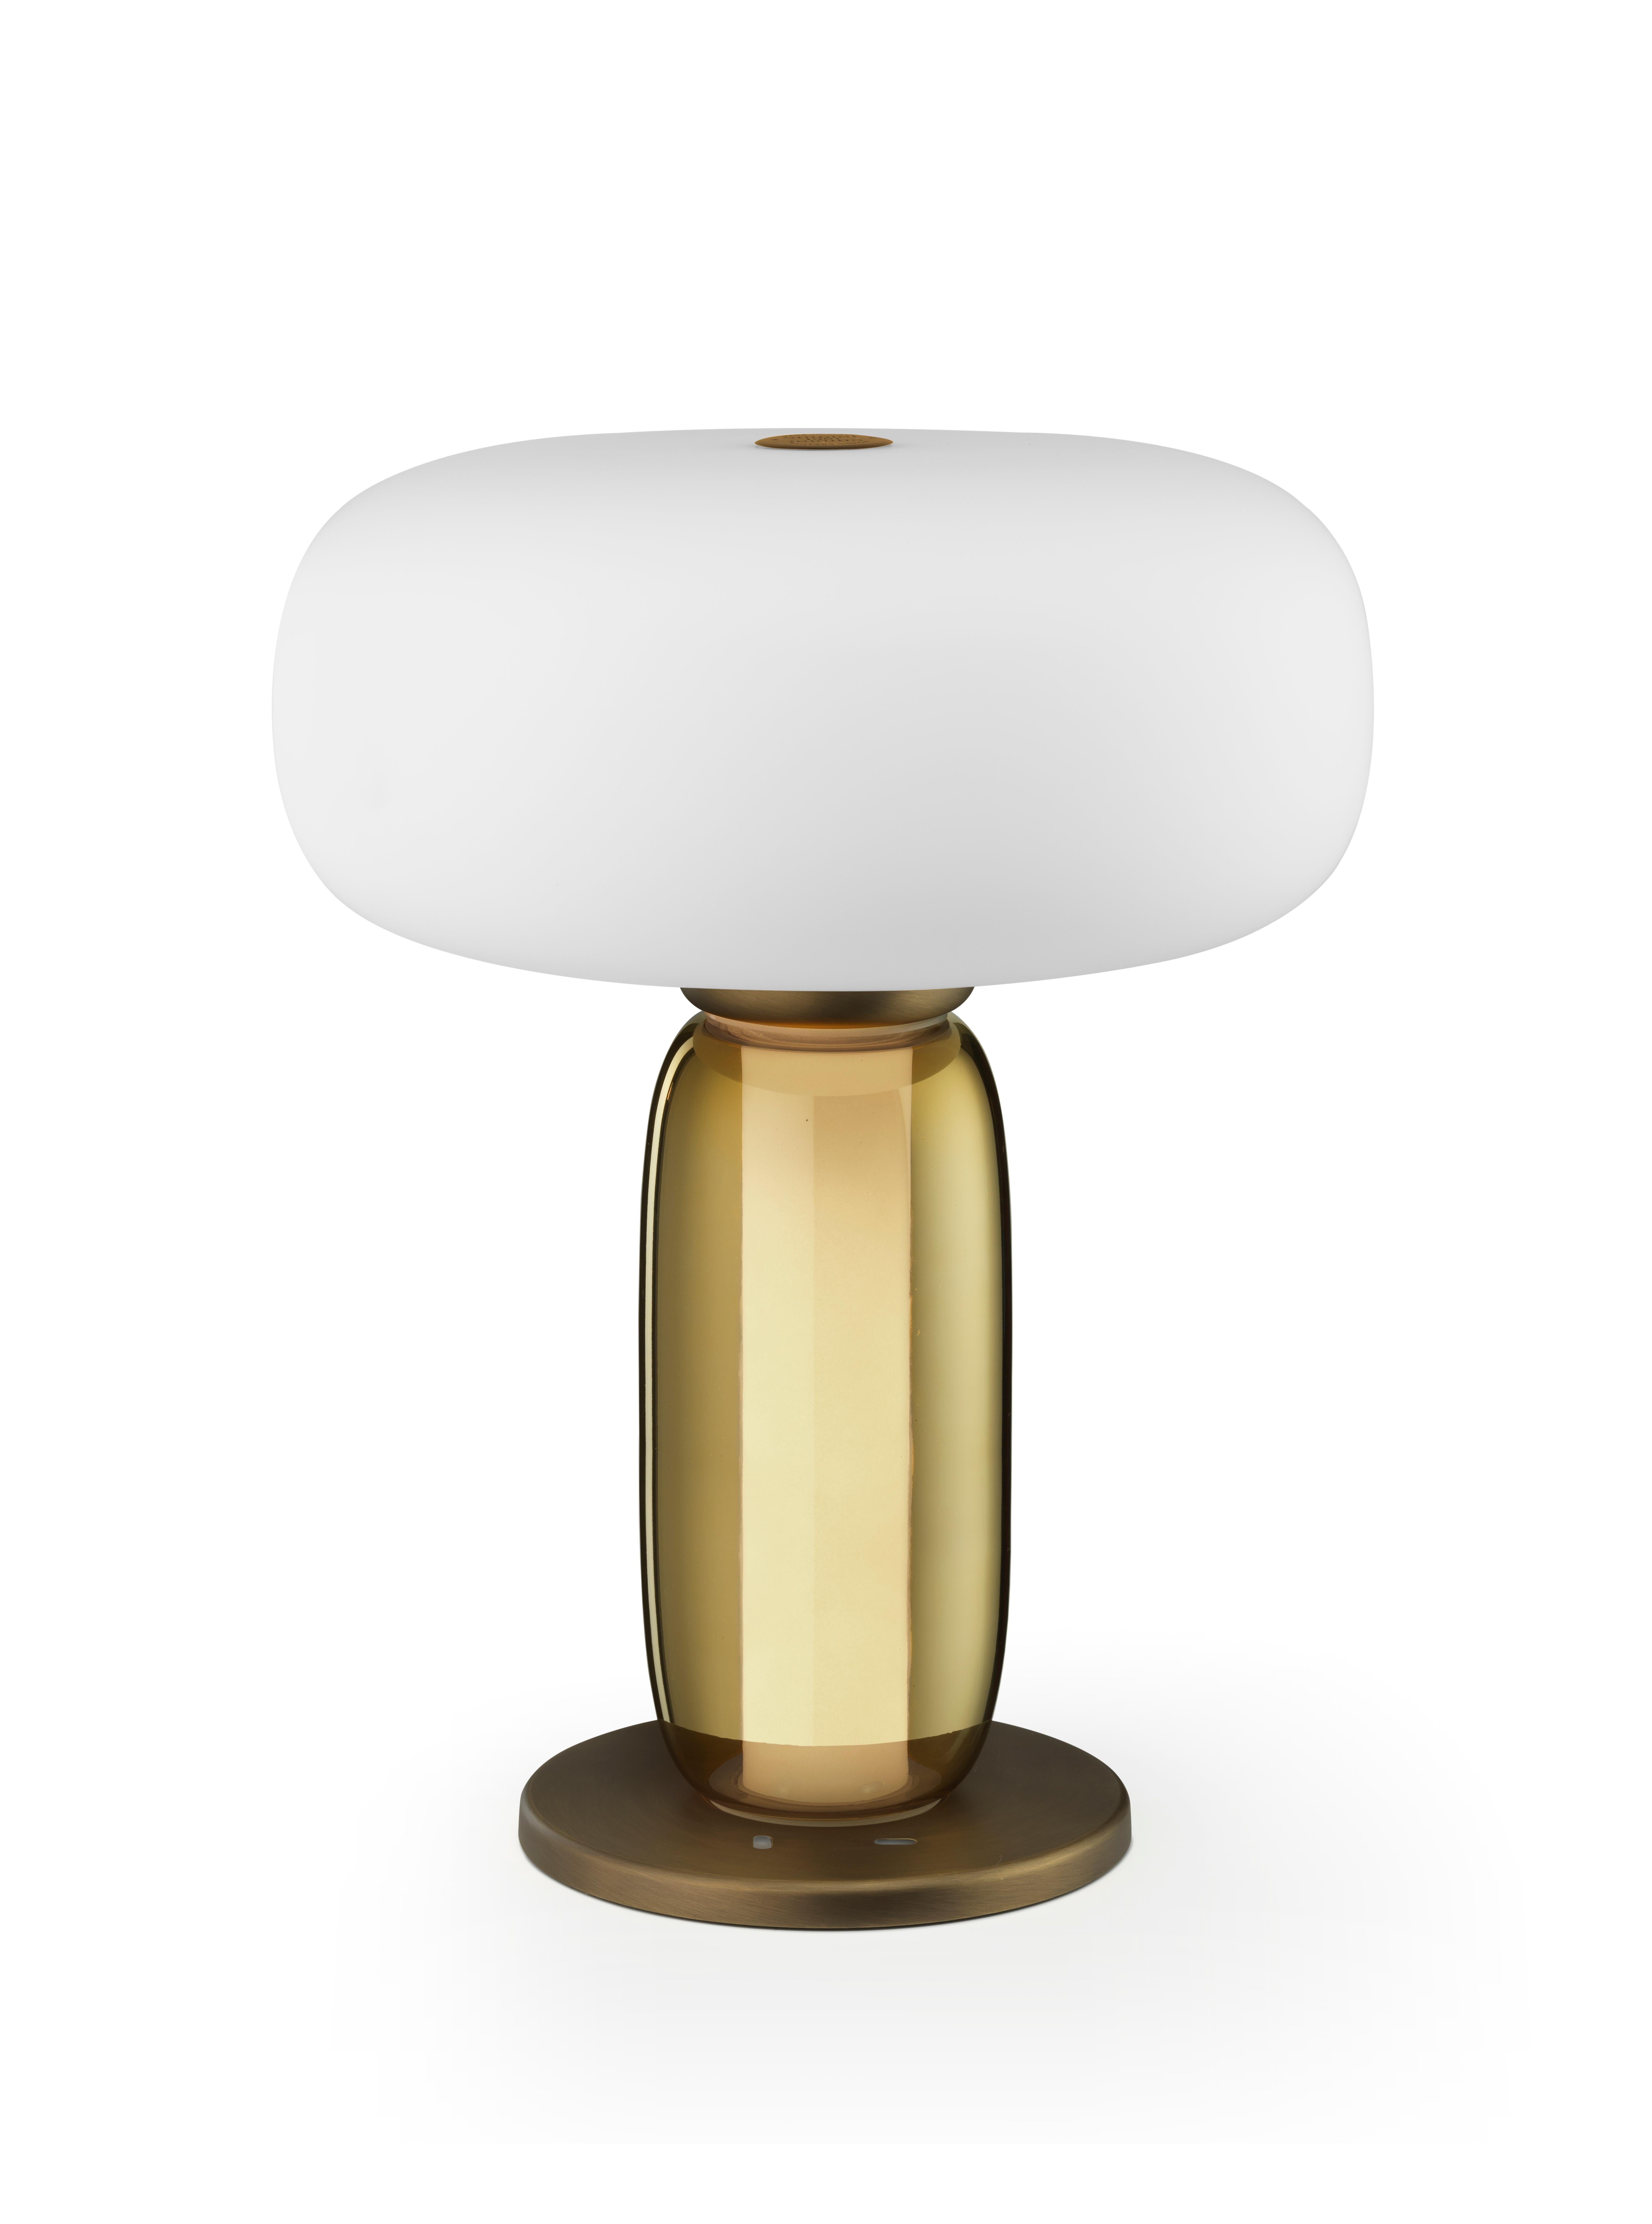 Italian Ghidini 1961 One on One Table Lamp in Burnished Brass and Glass by Branch For Sale